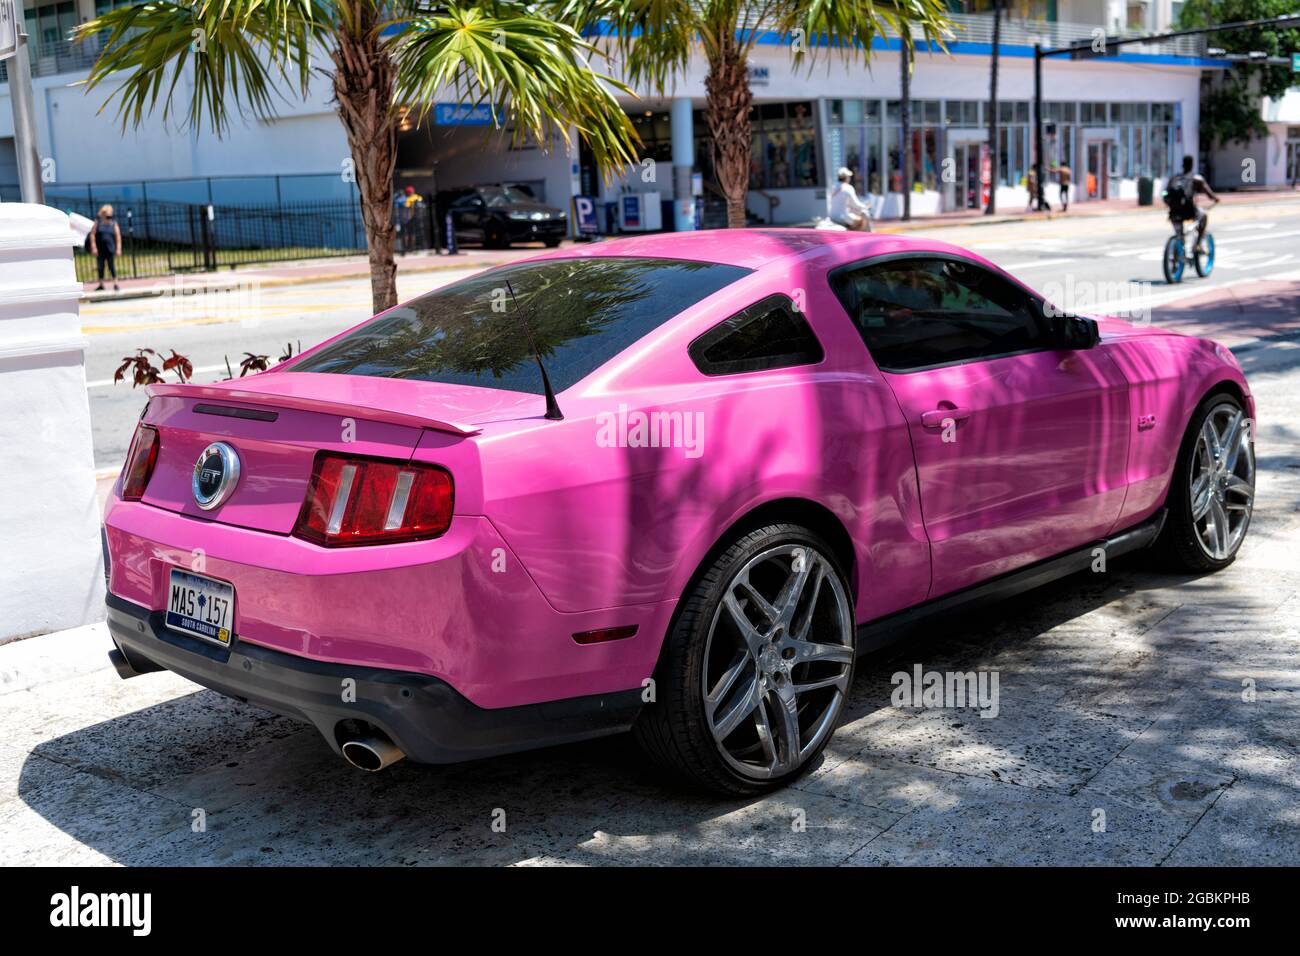 https://c8.alamy.com/comp/2GBKPHB/los-angeles-california-usa-april-14-2021-ford-mustang-gt-luxury-pink-car-parked-back-side-view-2GBKPHB.jpg